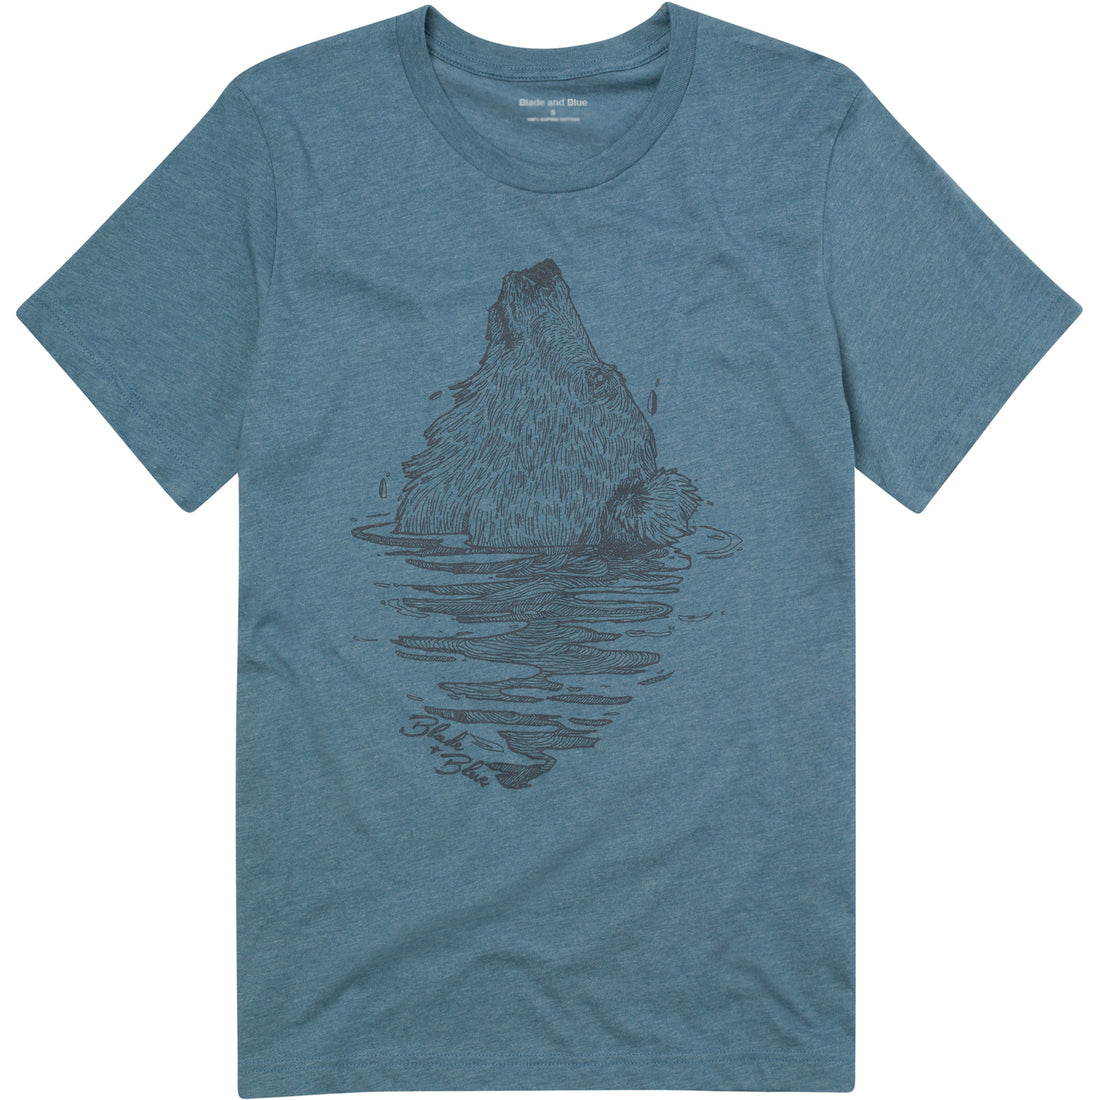 Teal Blue Crystallized Emerging Bear Graphic T-Shirt